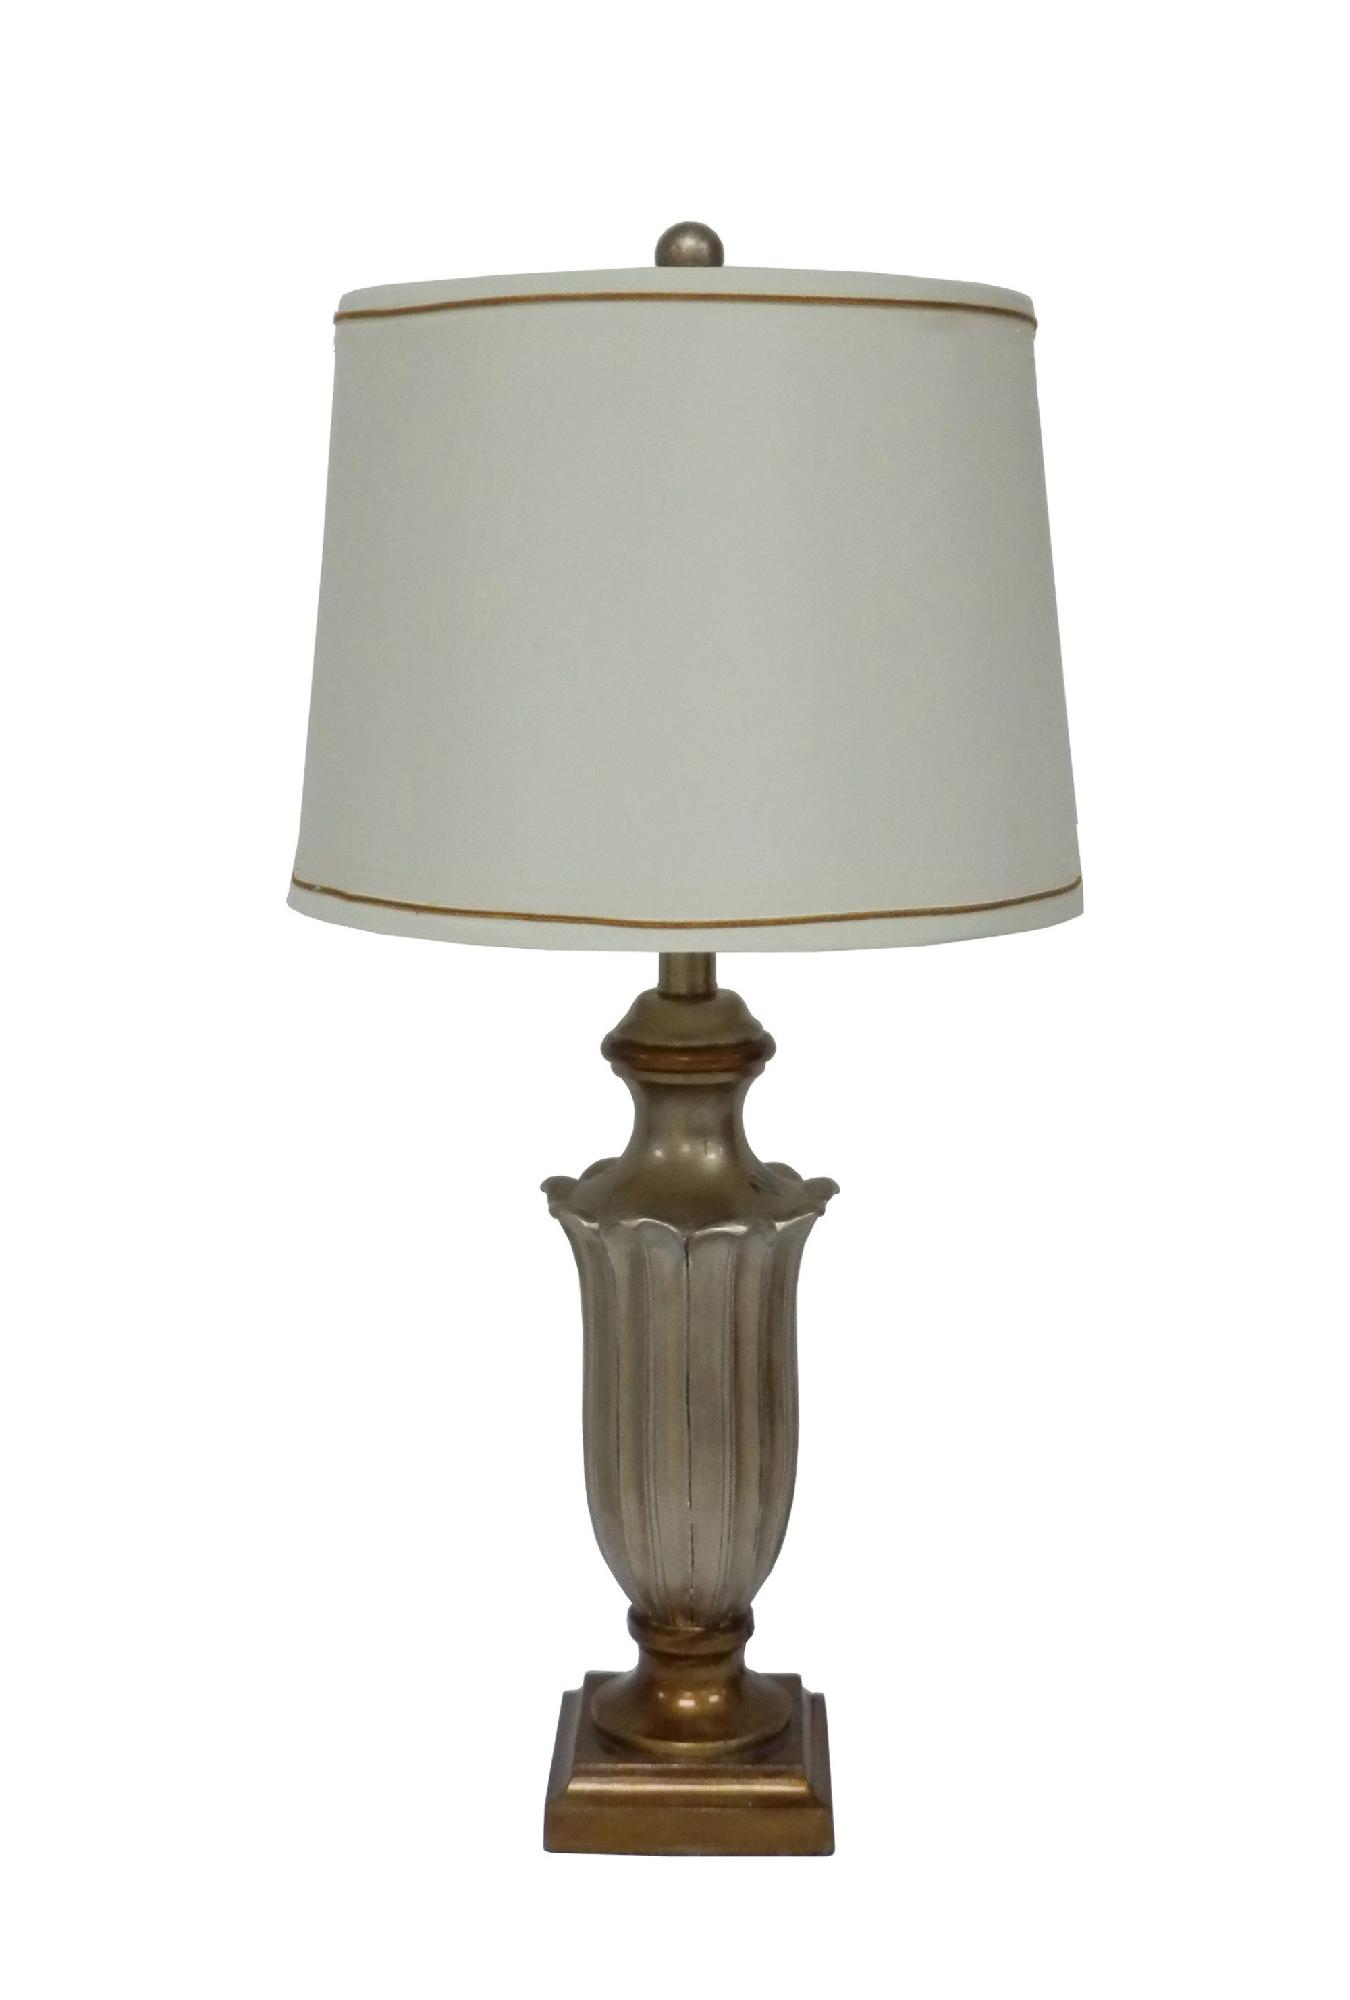 28" Resin Table Lamp with Antique Silver Finish.